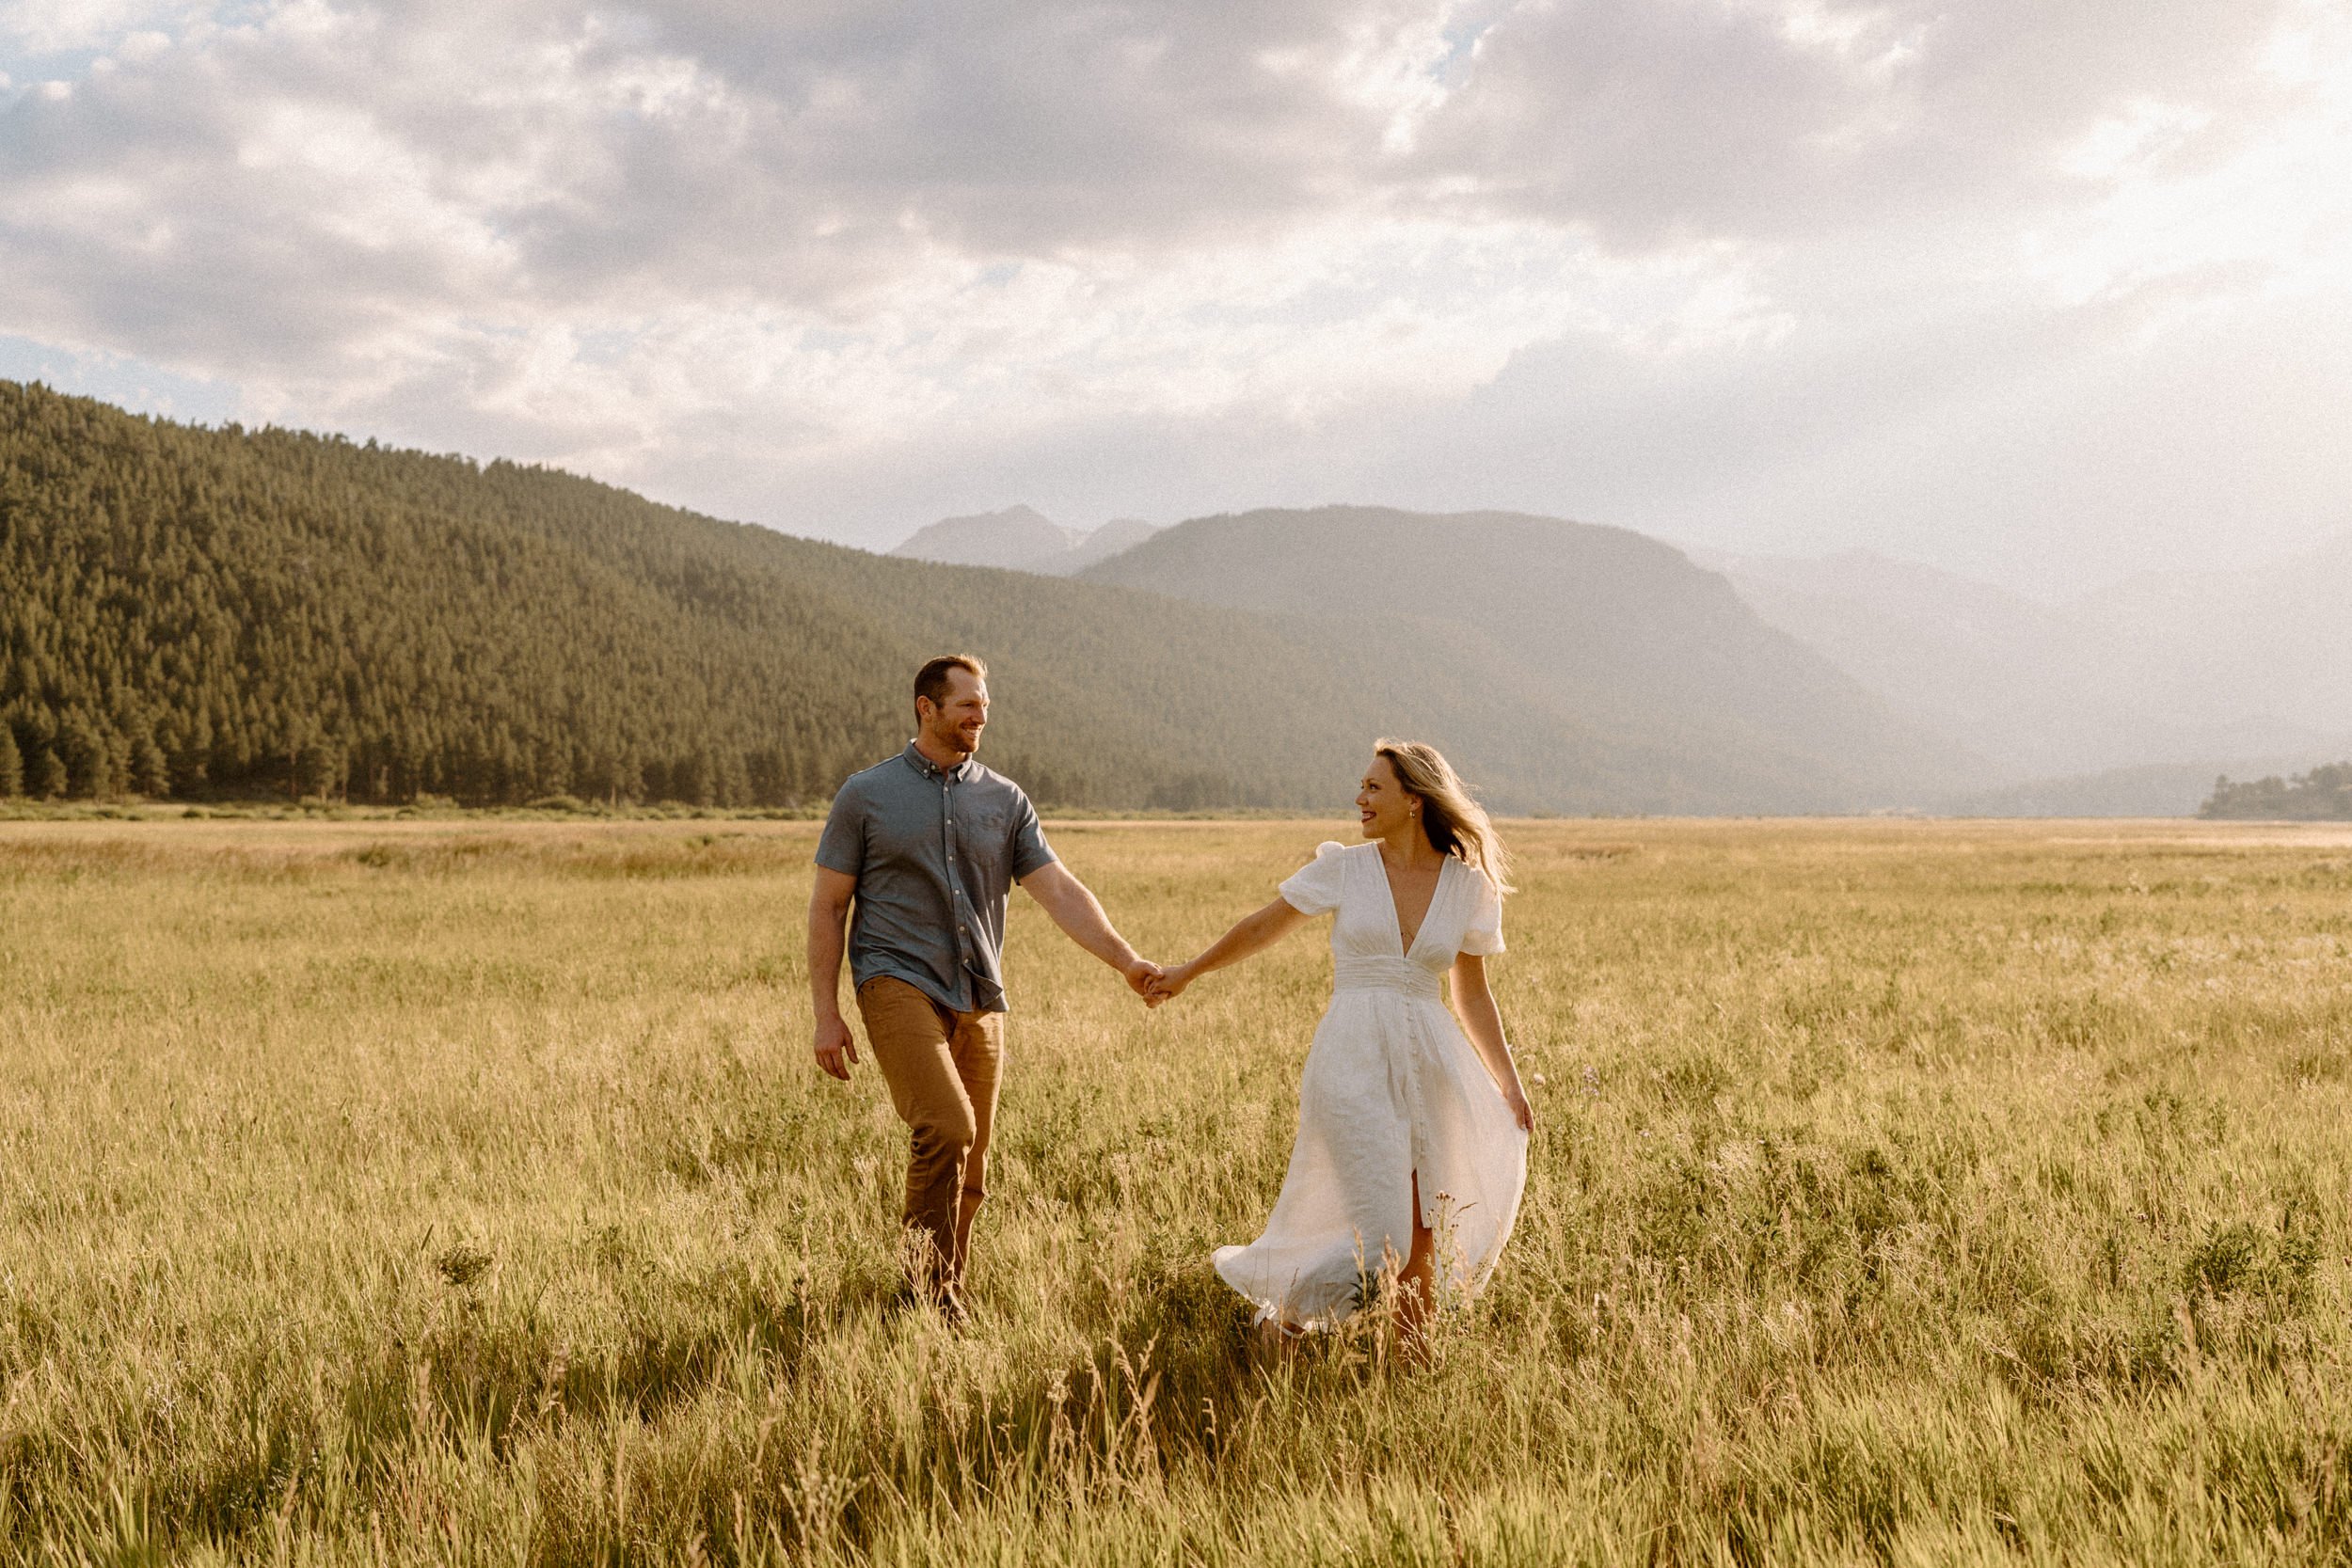 Woman leads man through a meadow in Rocky Mountain National Park